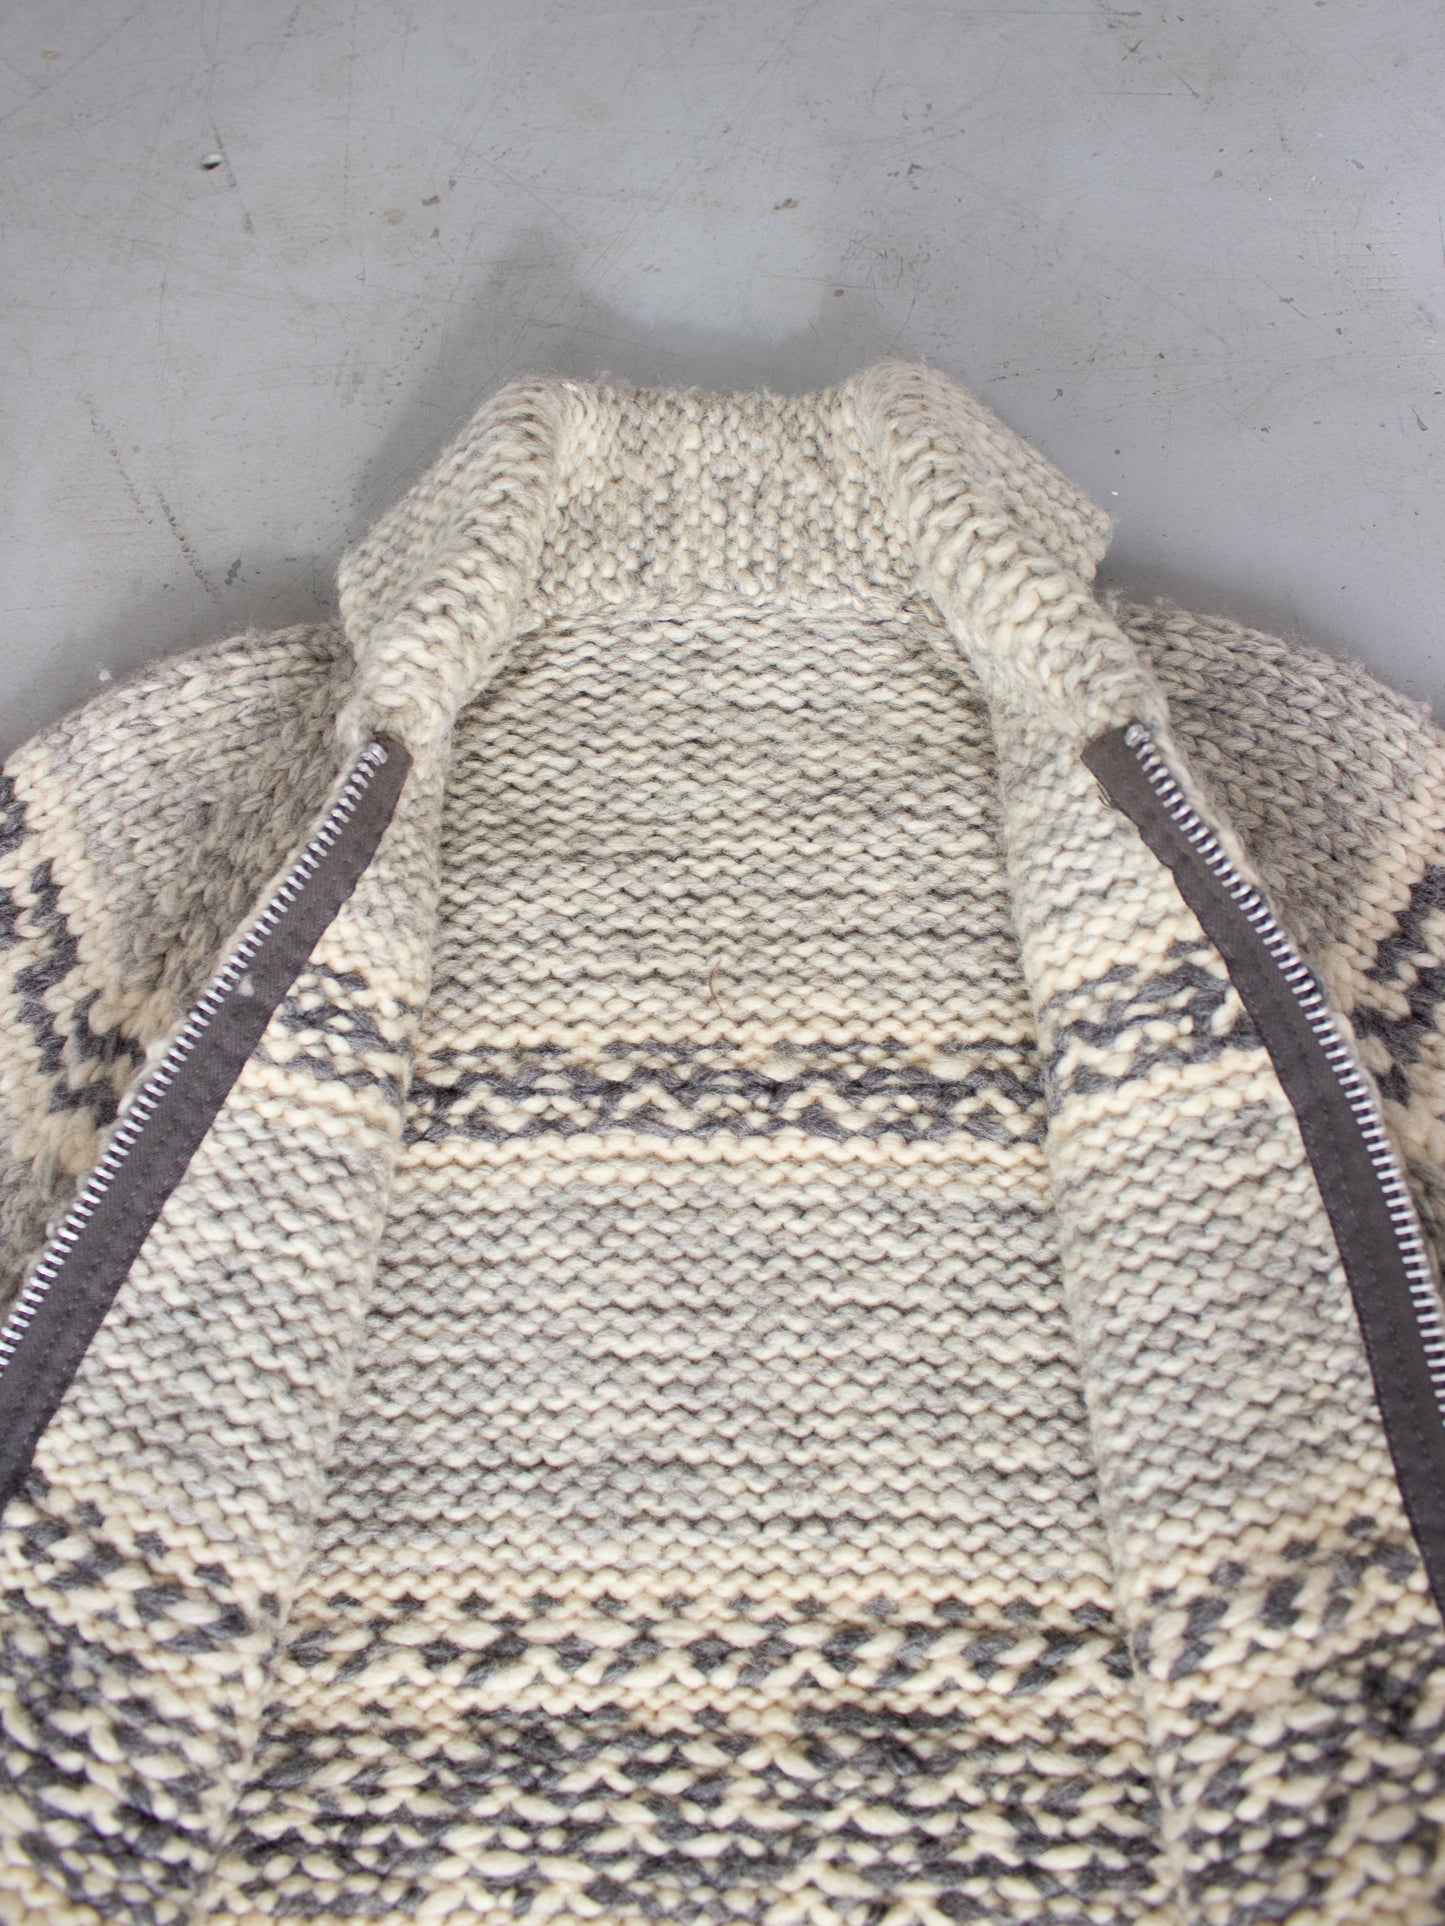 Vintage Cowichan Style Thick Wool Knit Sweater in Gray and Beige with Acme Zipper Medium-Large